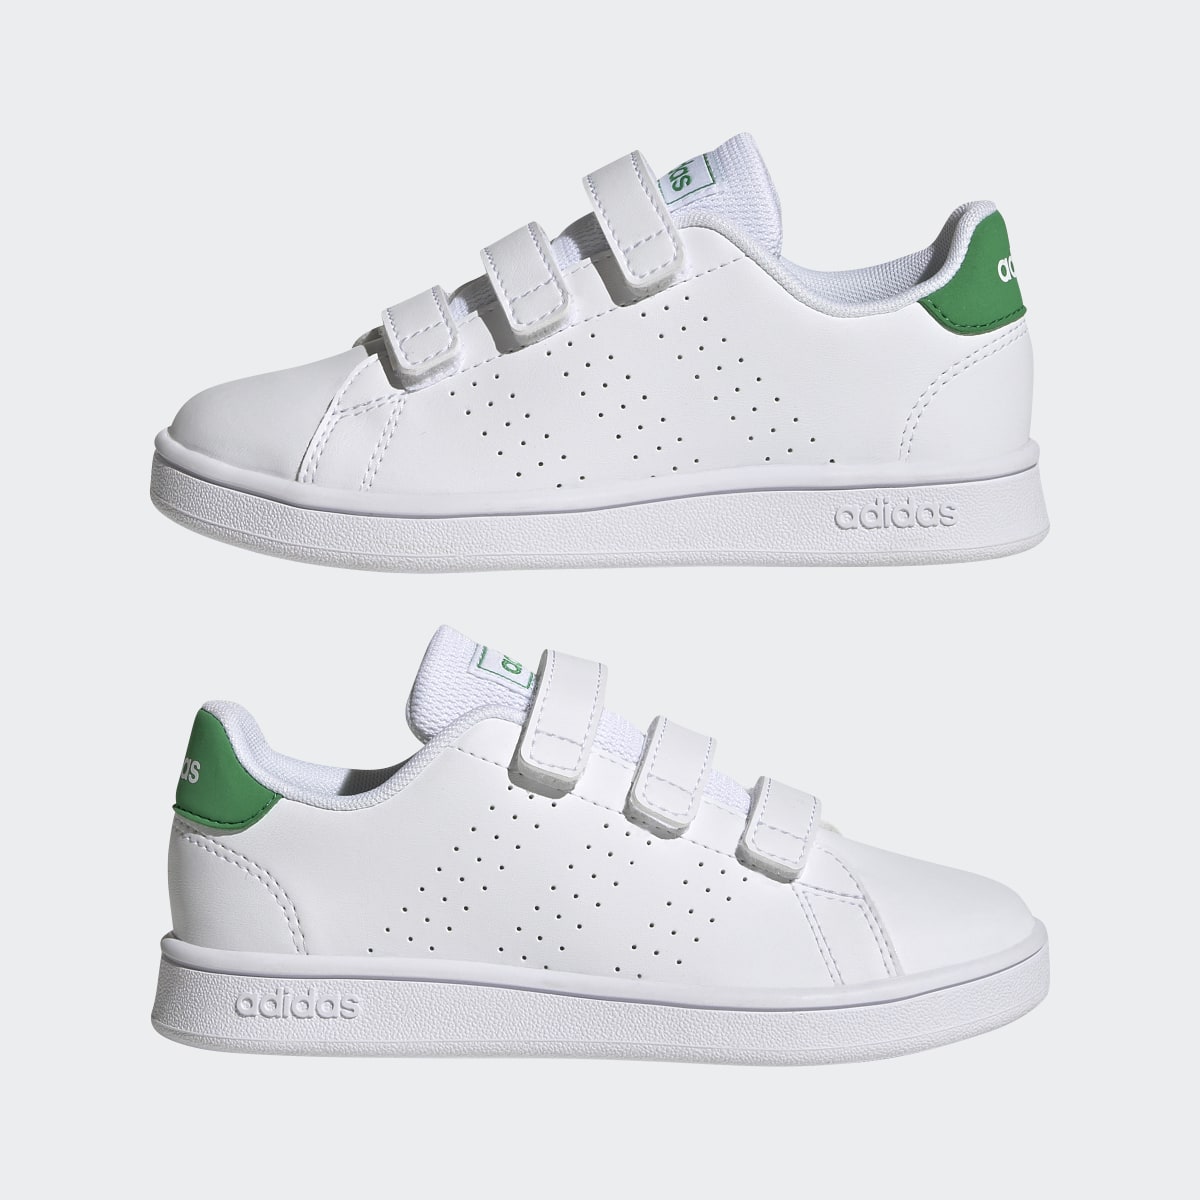 Adidas Advantage Court Lifestyle Hook-and-Loop Schuh. 8